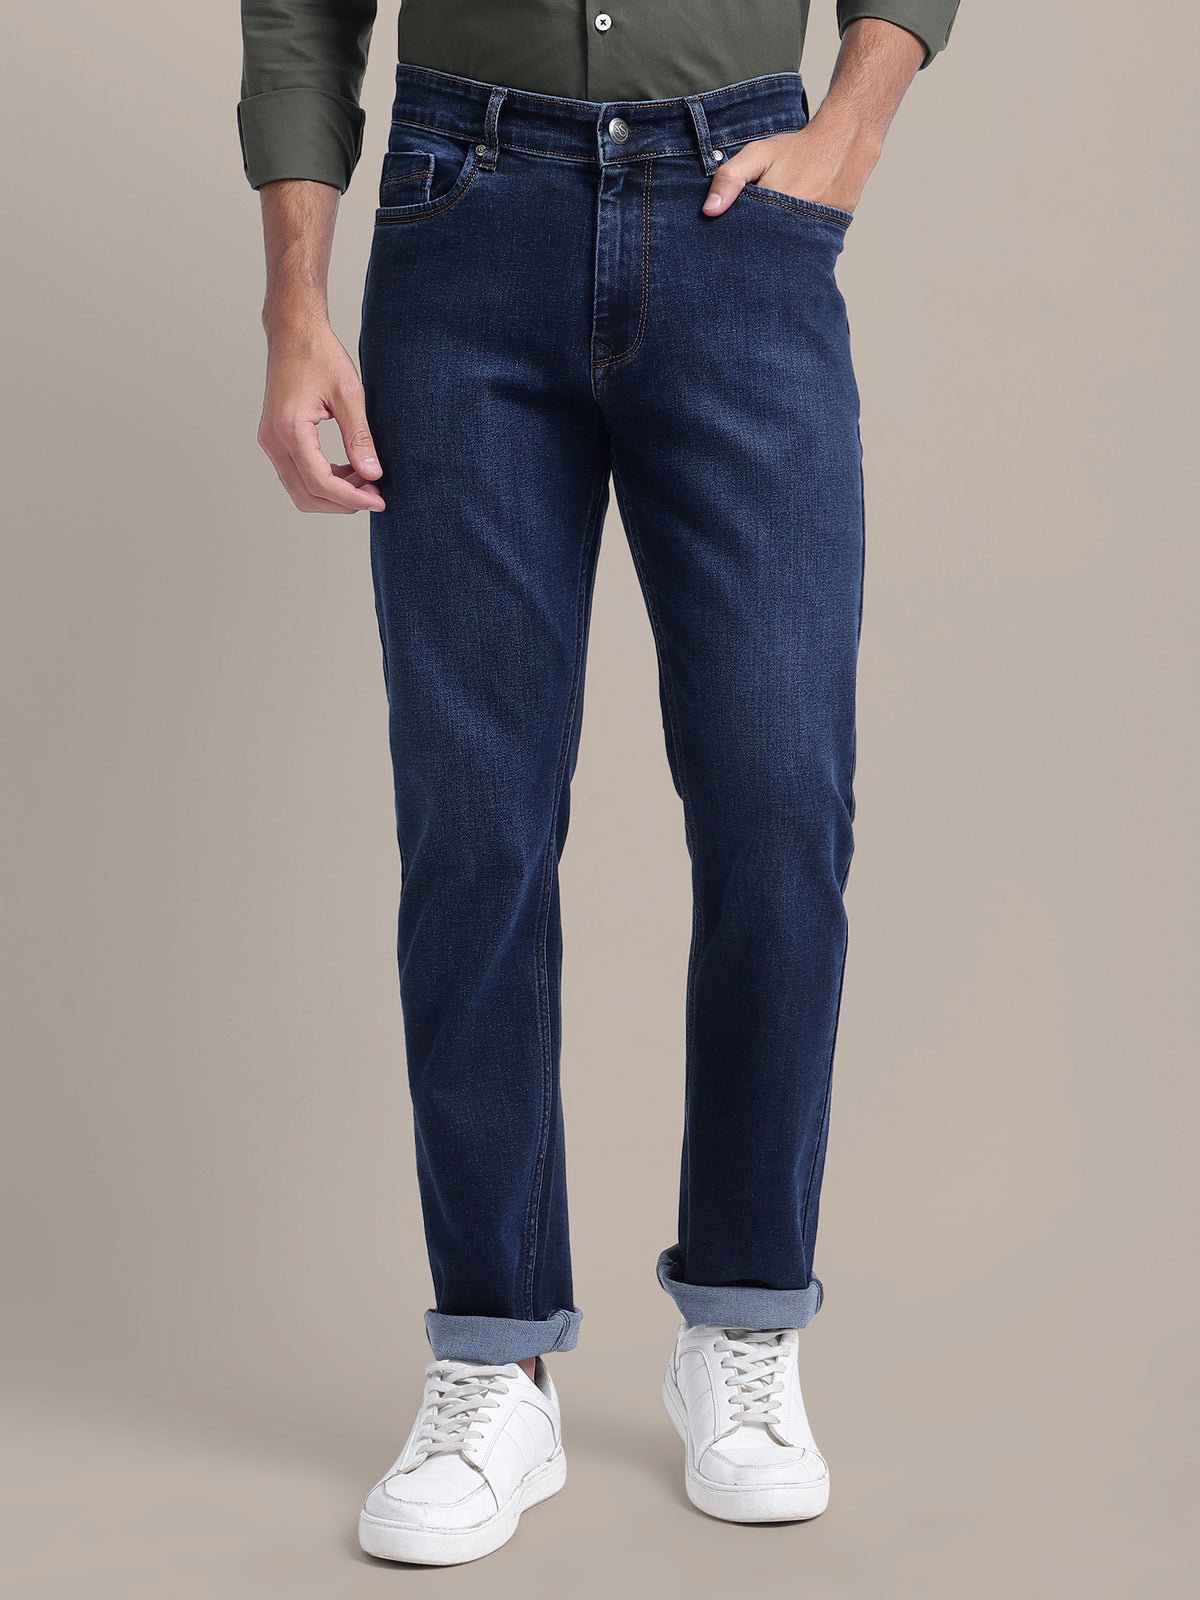 Premium Stretchable Jeans With Straight Fit